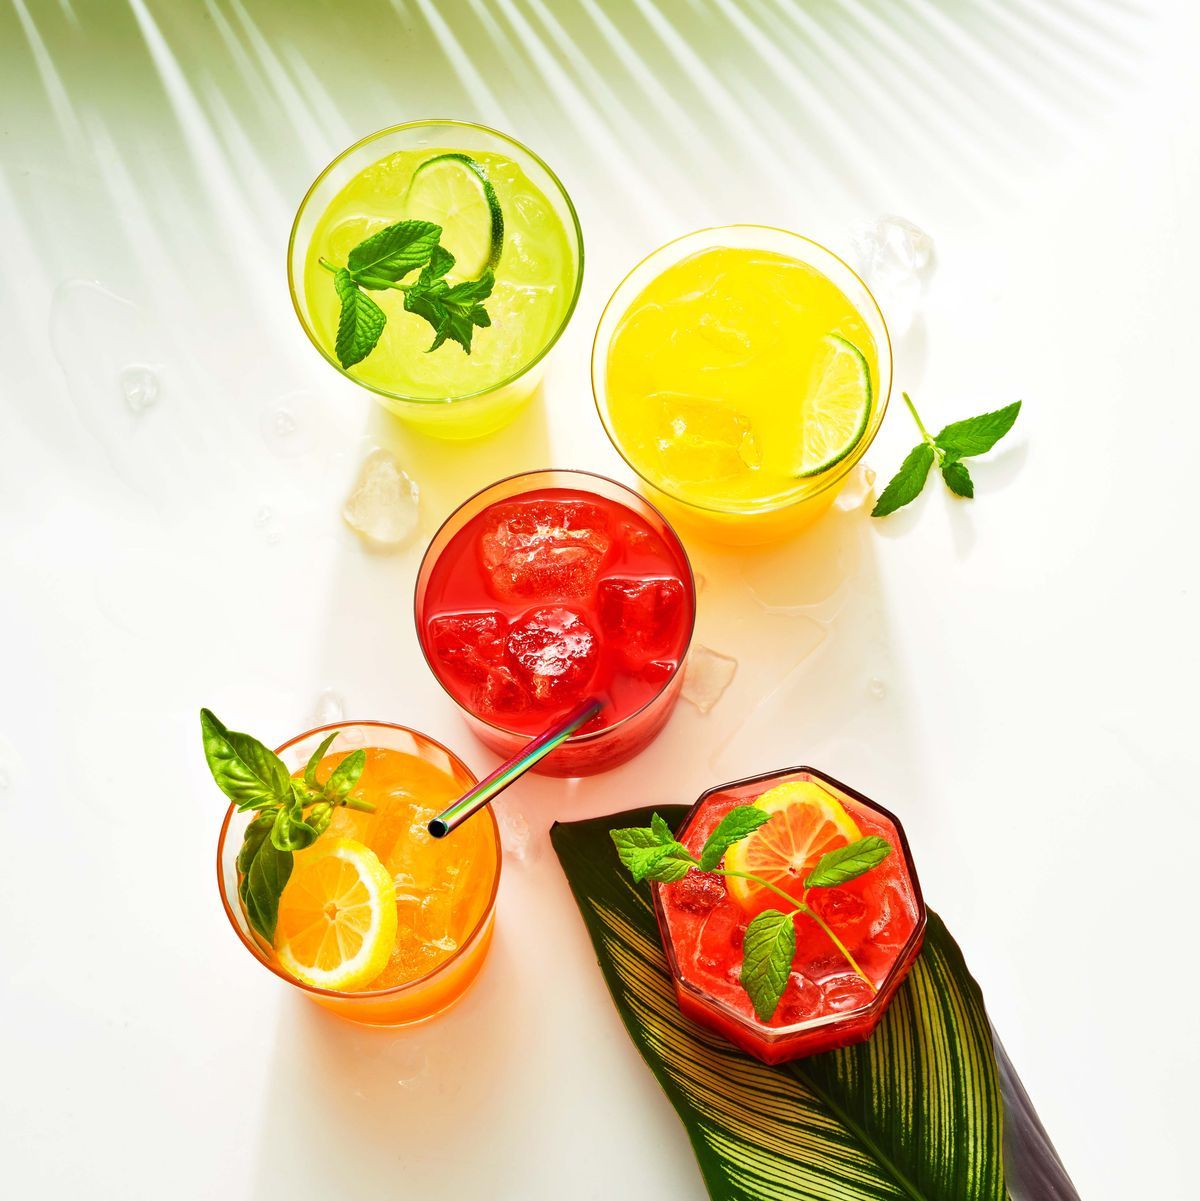 Mocktail Recipes: 17+ Fun & Tasty Non Alcoholic Drinks - Bake It With Love